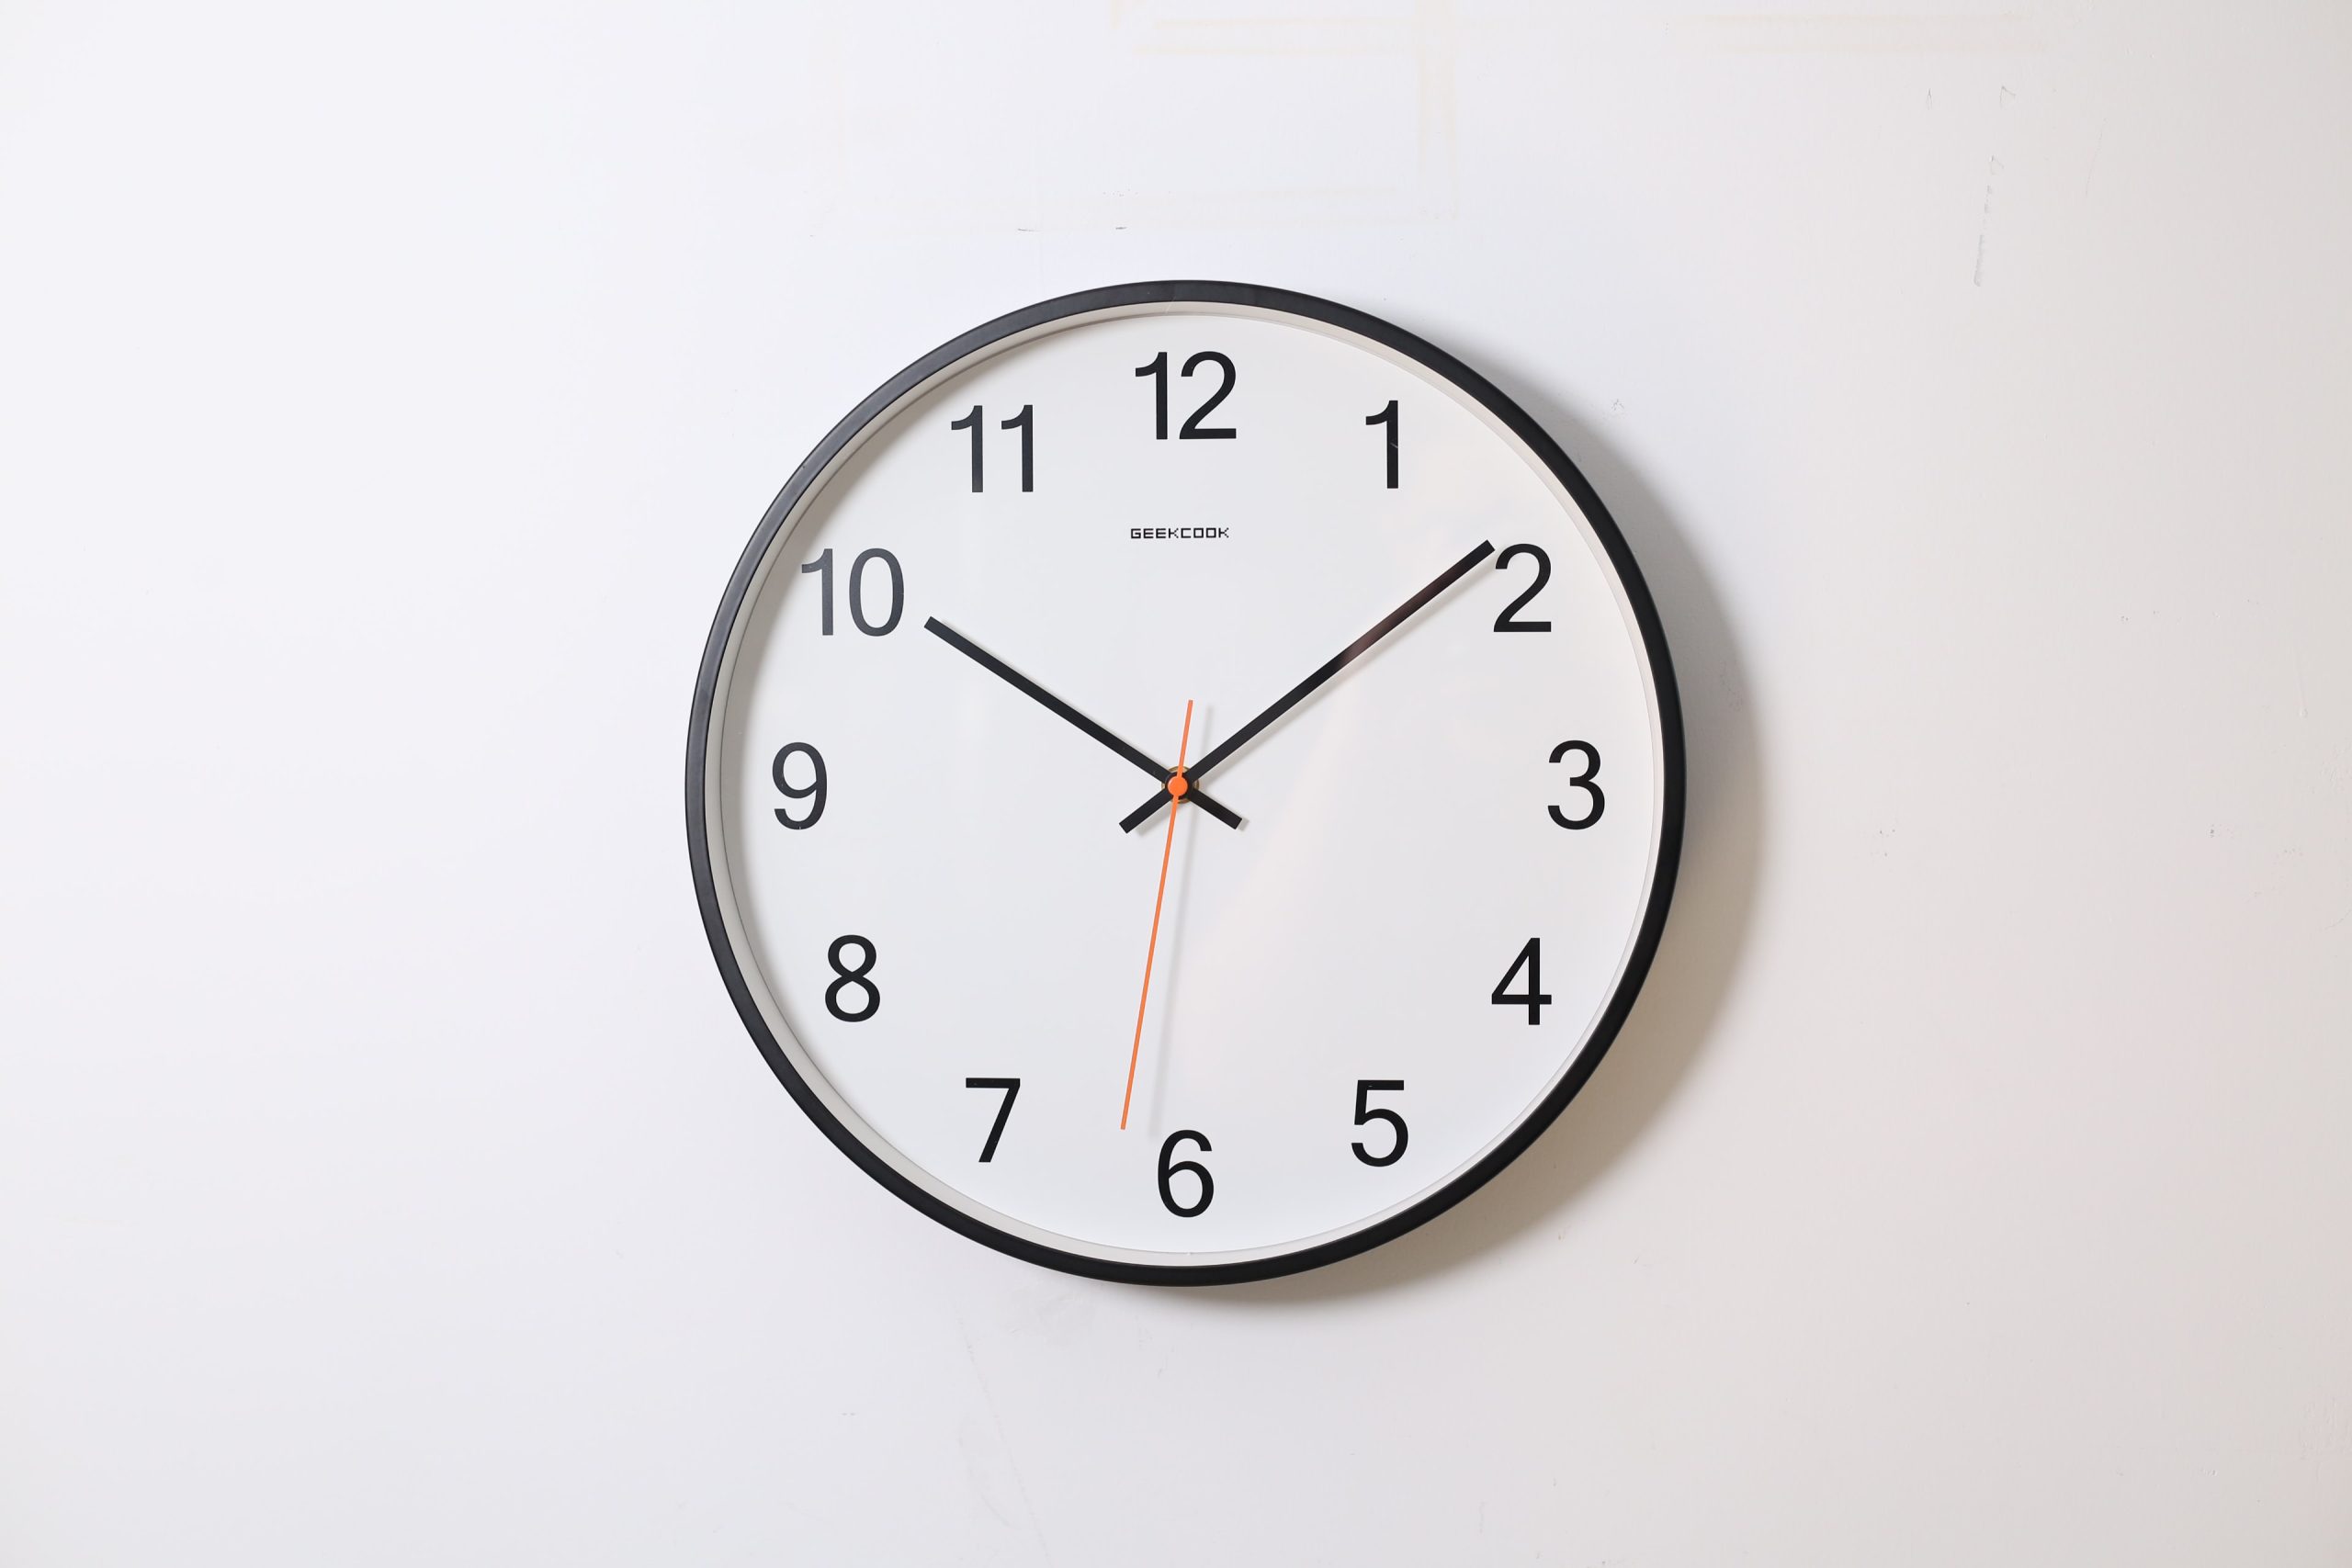 A clock on the wall representing a time-clause offer in real estate, when choosing to sell or buy a home first.